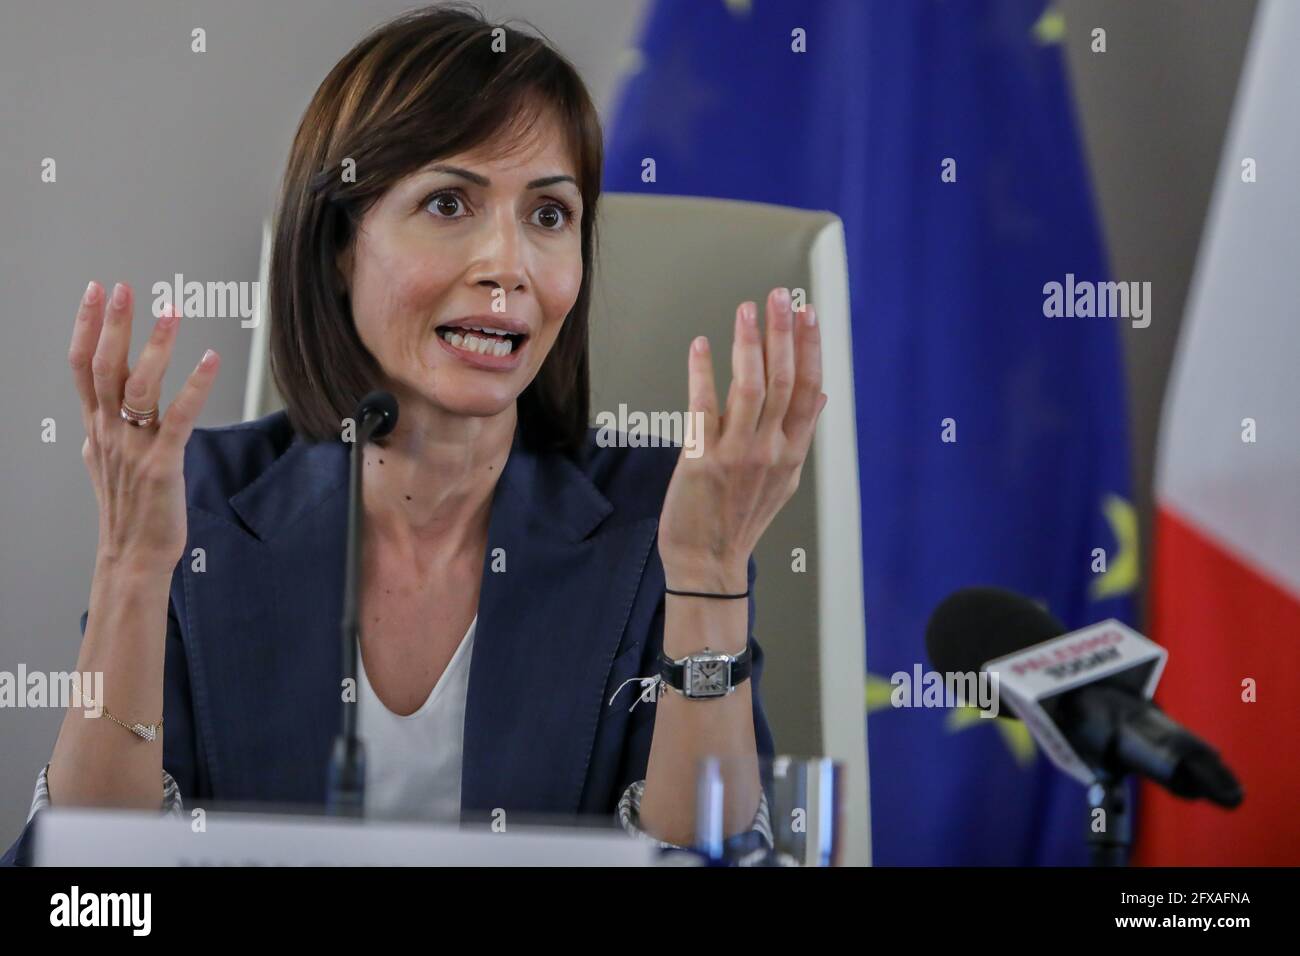 Mara Carfagna, Minister for the South and Territorial Cohesion, during the Press Conference in Palermo, Italy on May 25, 2021. (Photo by Antonio Melita/Pacific Press/Sipa USA) Stock Photo